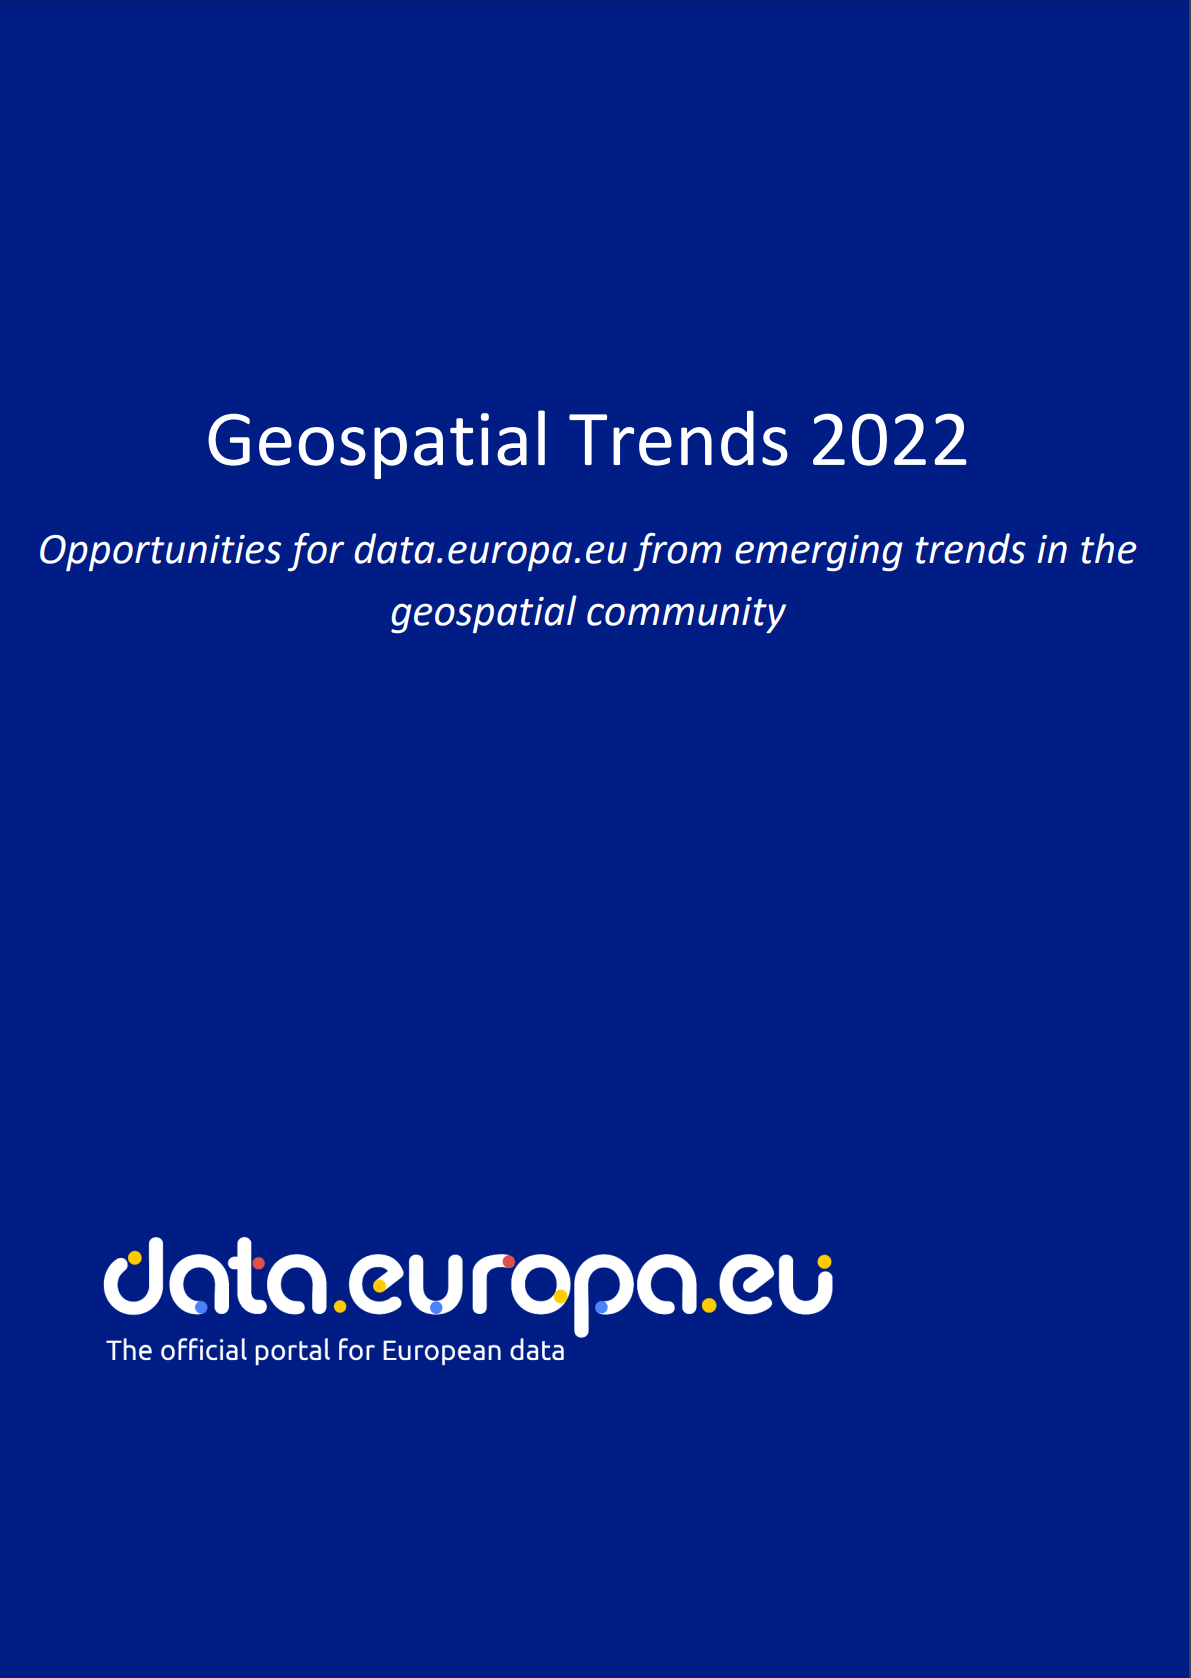 Geospatial Trends 2022: Opportunities for data.europa.eu from emerging trends in the geospatial community